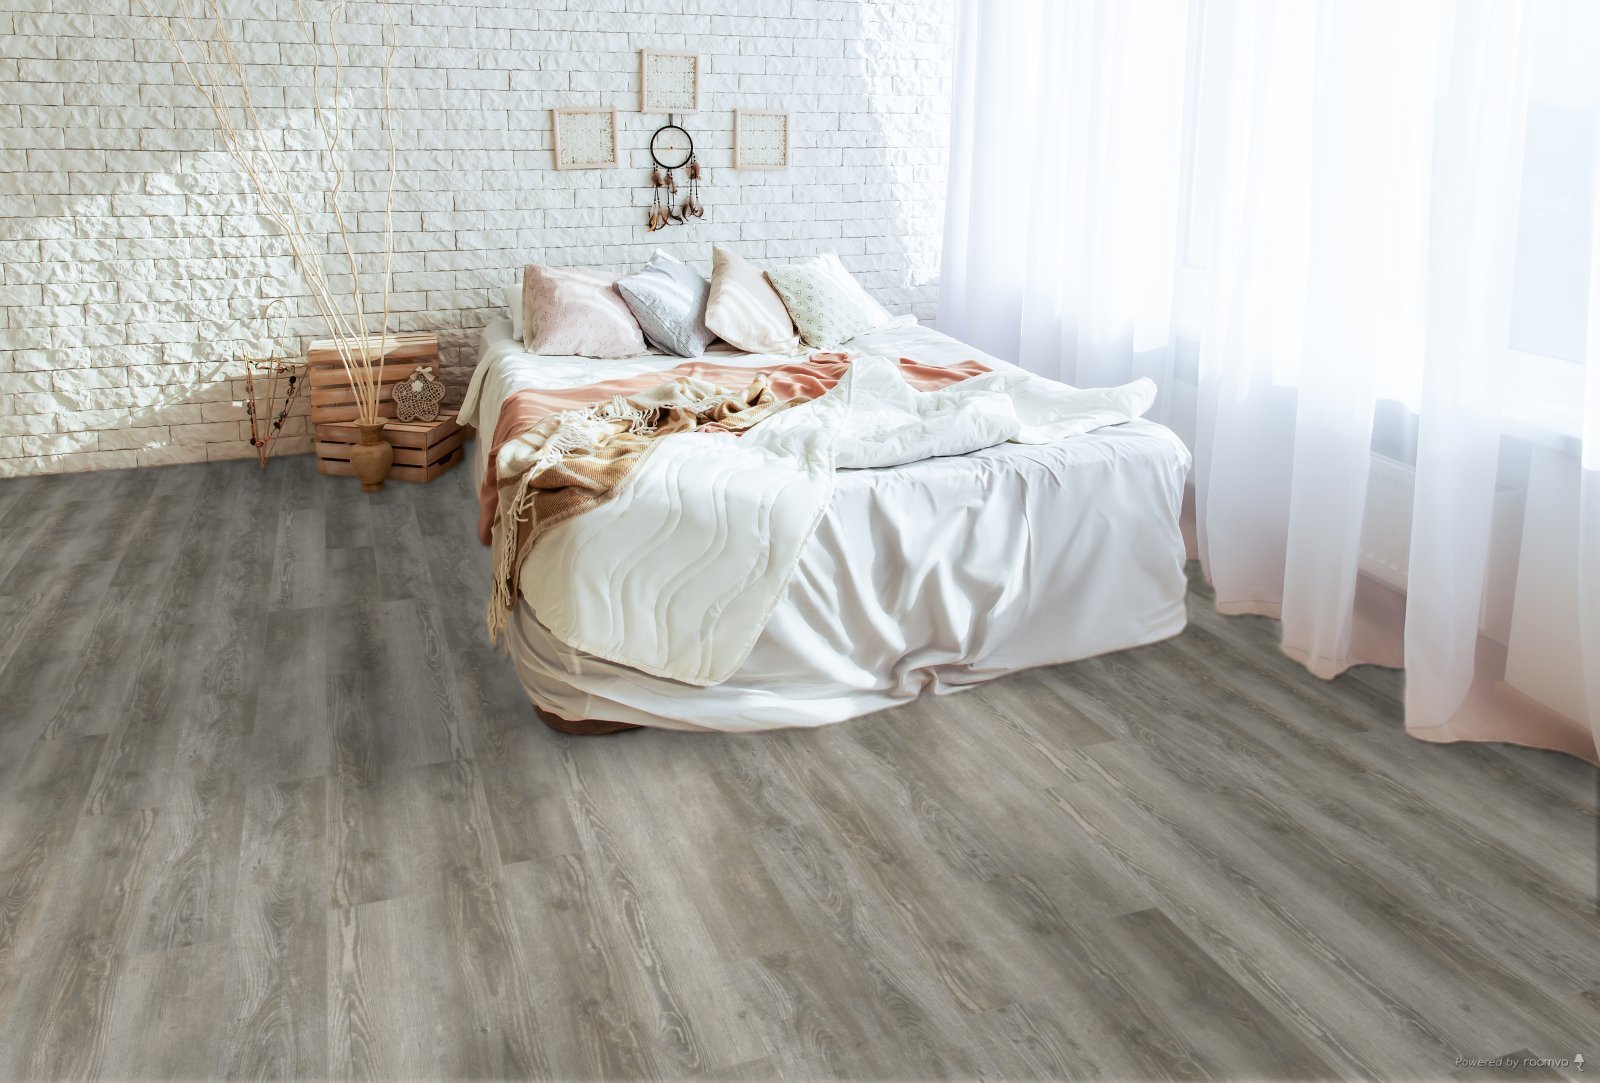 Horizen Flooring presents to you a picture of a quality wide plank Pacific Grove luxury vinyl plank. NovoCore Q Merengue collection features a wide range of colors & designs that will compliment any interior. Natural wood grain synchronized surface allow for an authentic hardwood look & feel. This collection features a 0.3″ / 7.5 mm overall thickness and a durable 22 mil / 0.55 mm wear layer for residential and commercial applications.